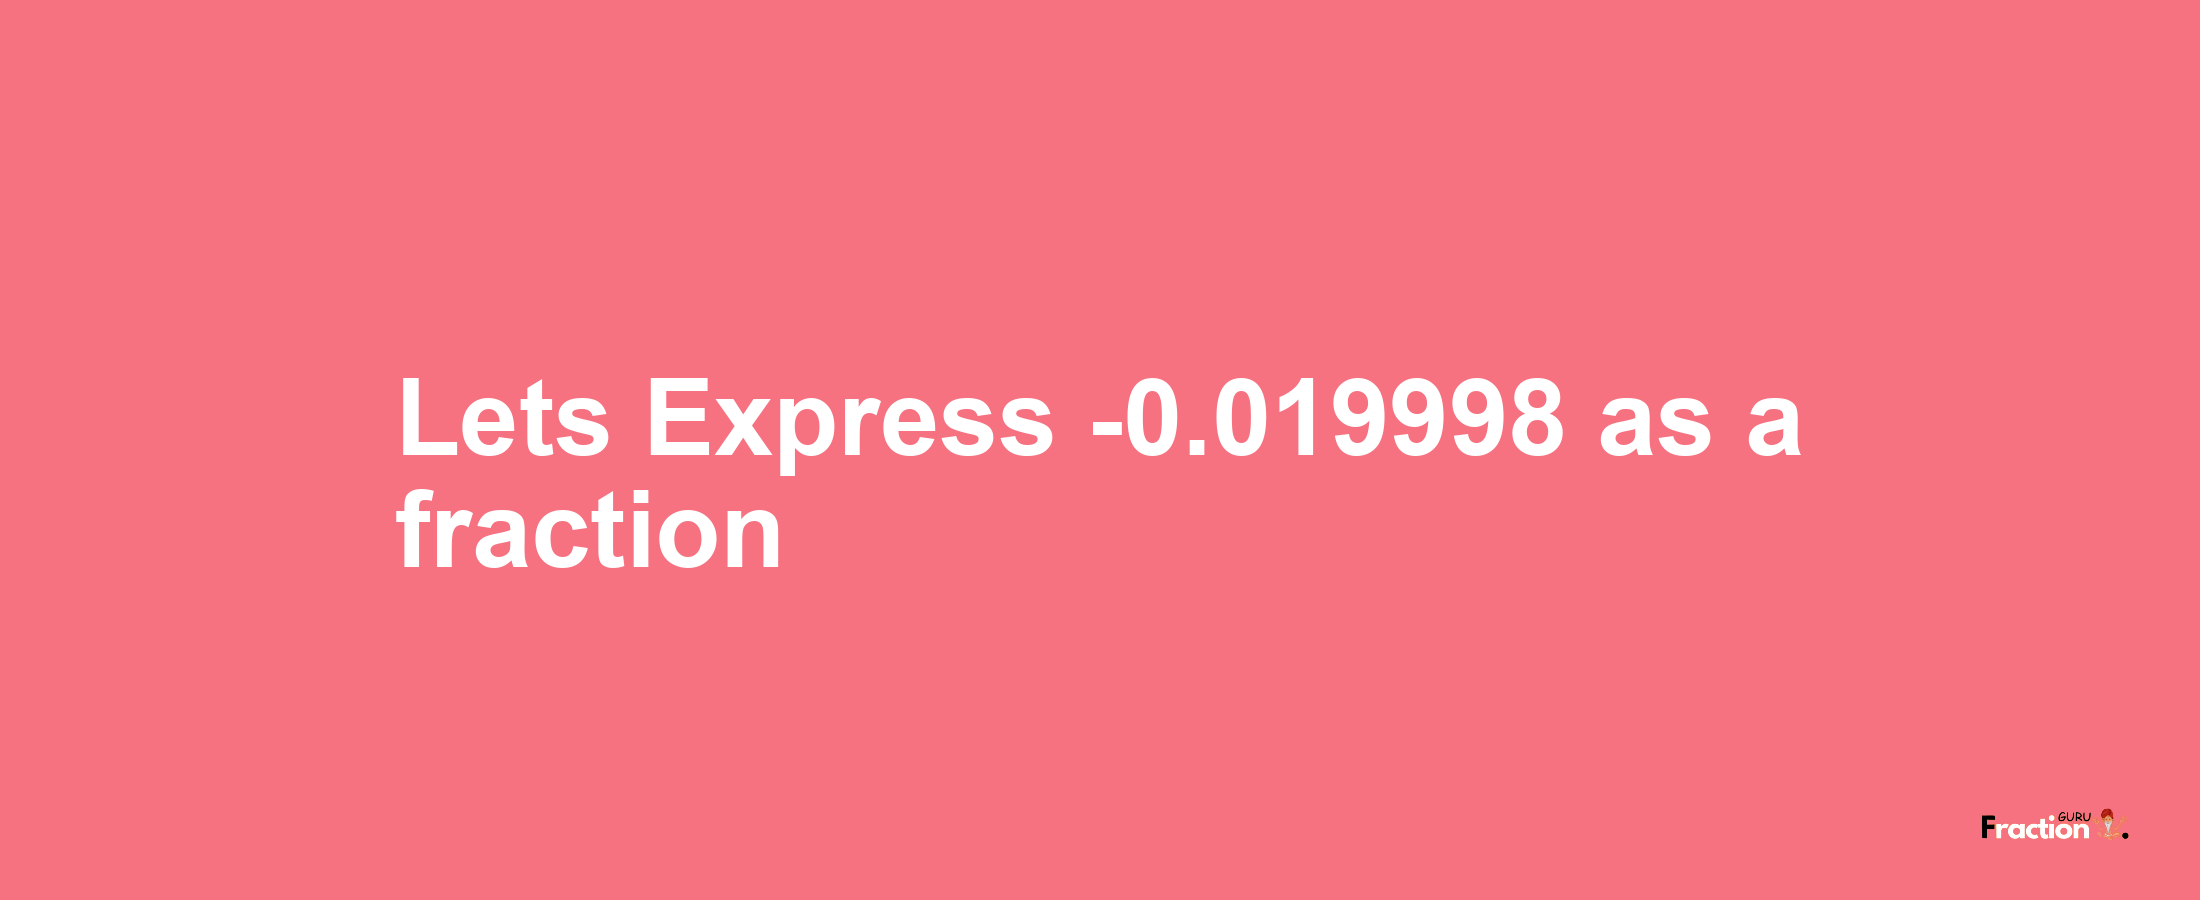 Lets Express -0.019998 as afraction